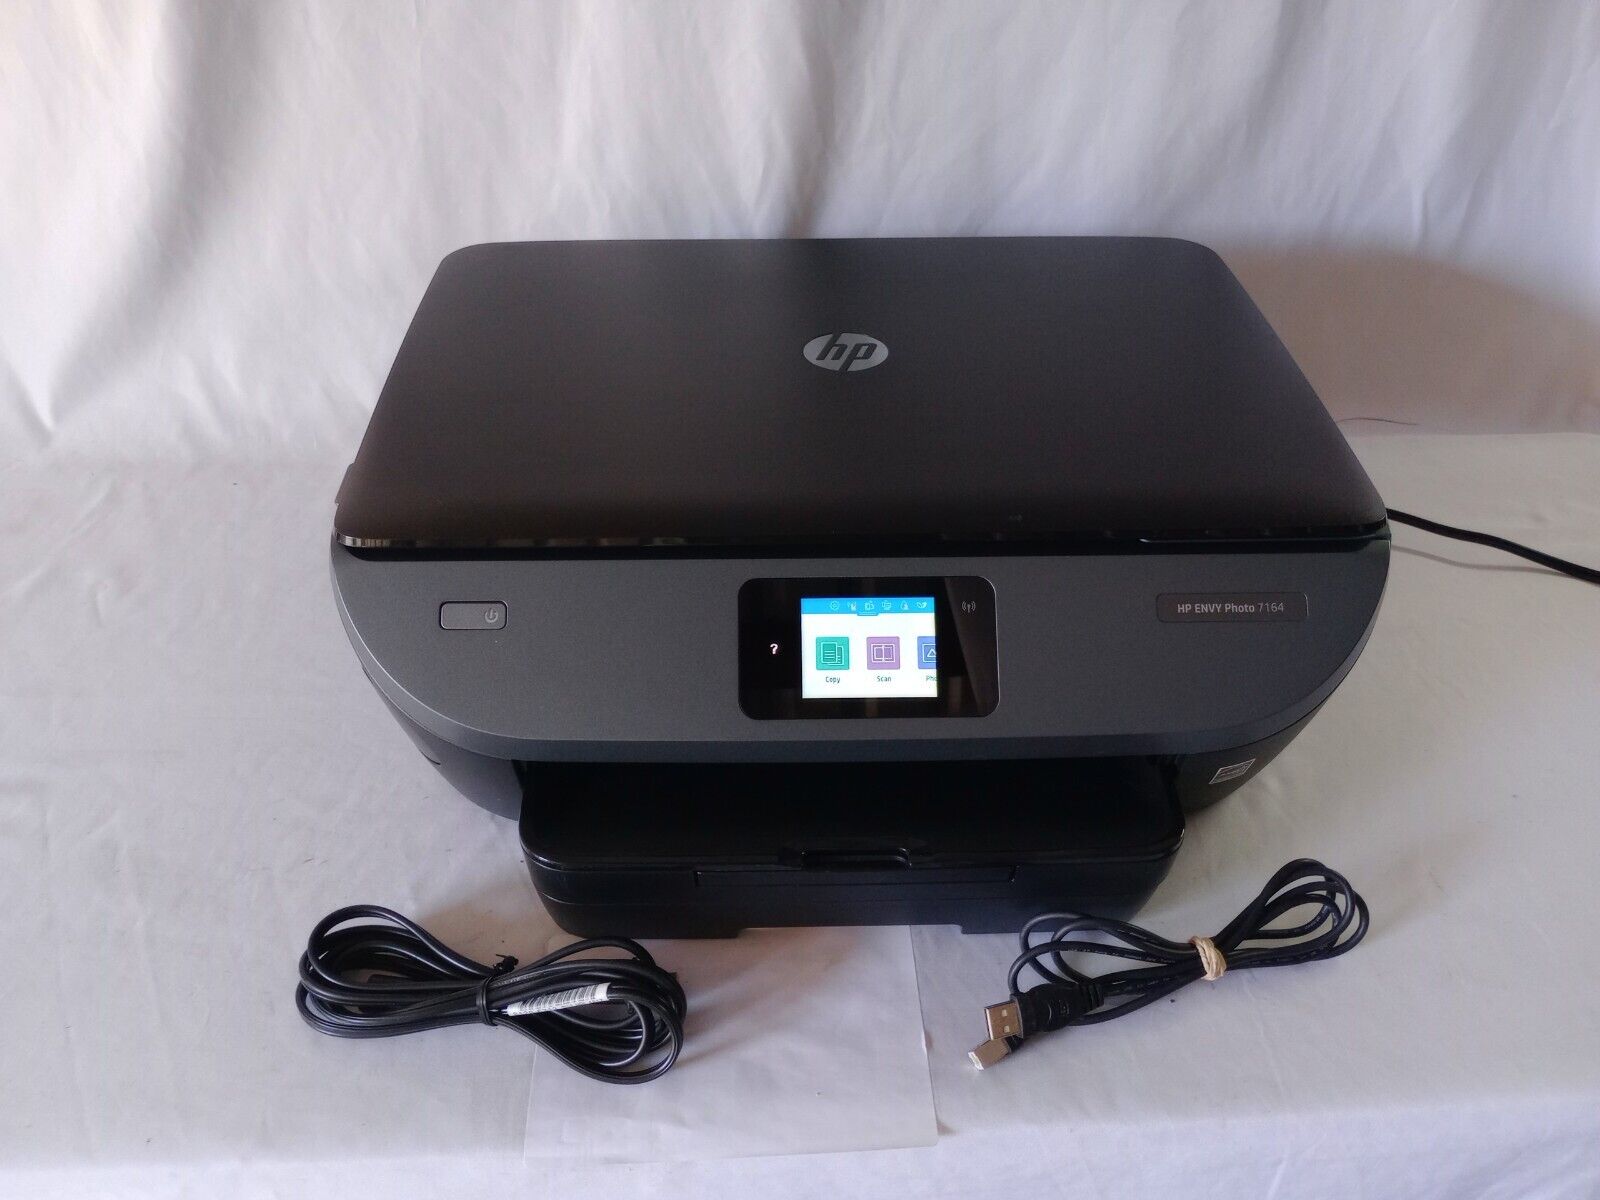 HP Envy Photo 7164 All-in-One Wireless Photo Printer Tested Low Pages Printed. 